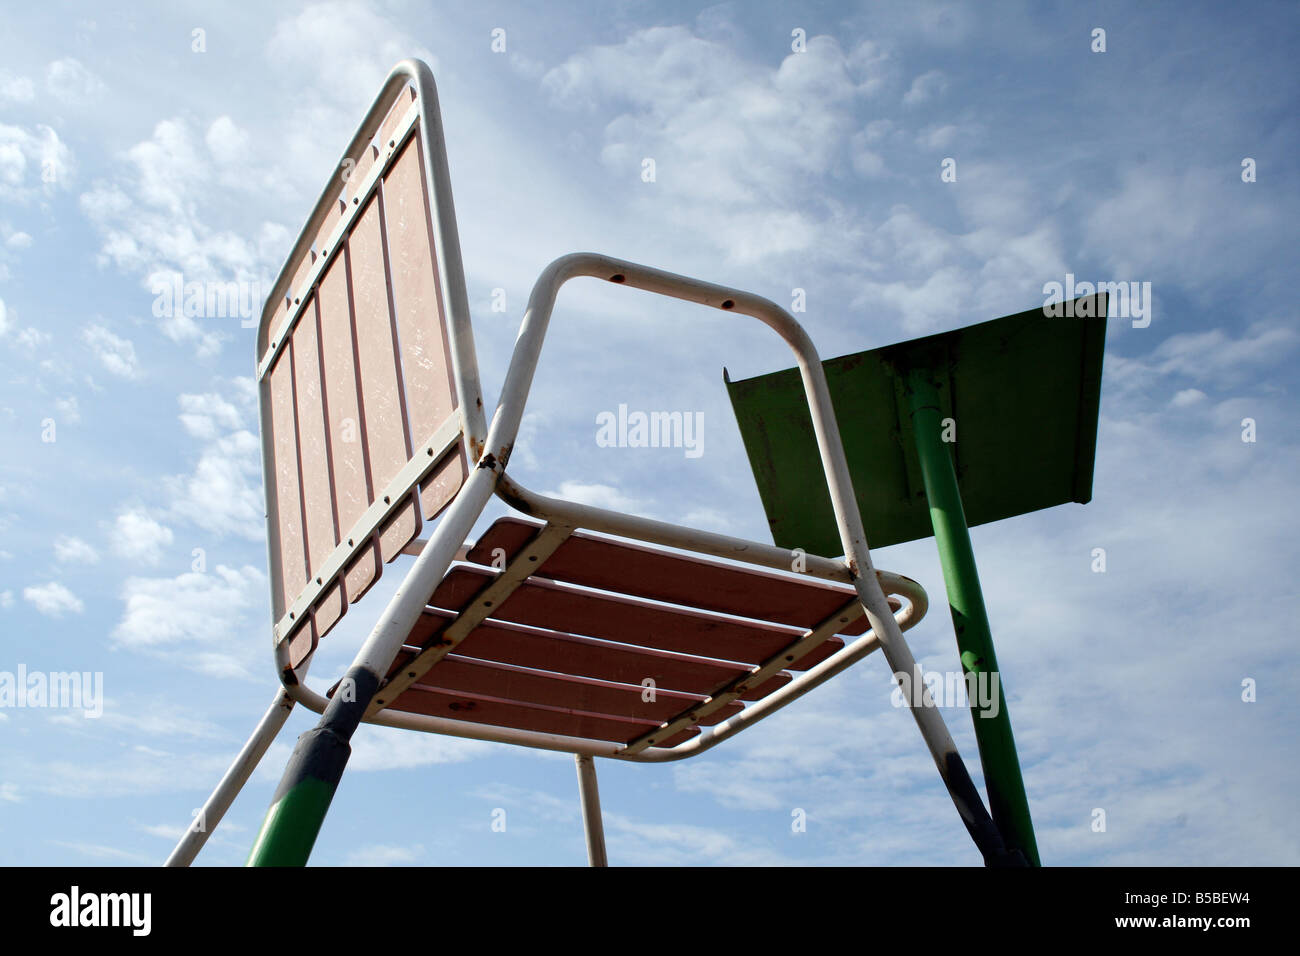 Umpire's chair on a tennis court Stock Photo